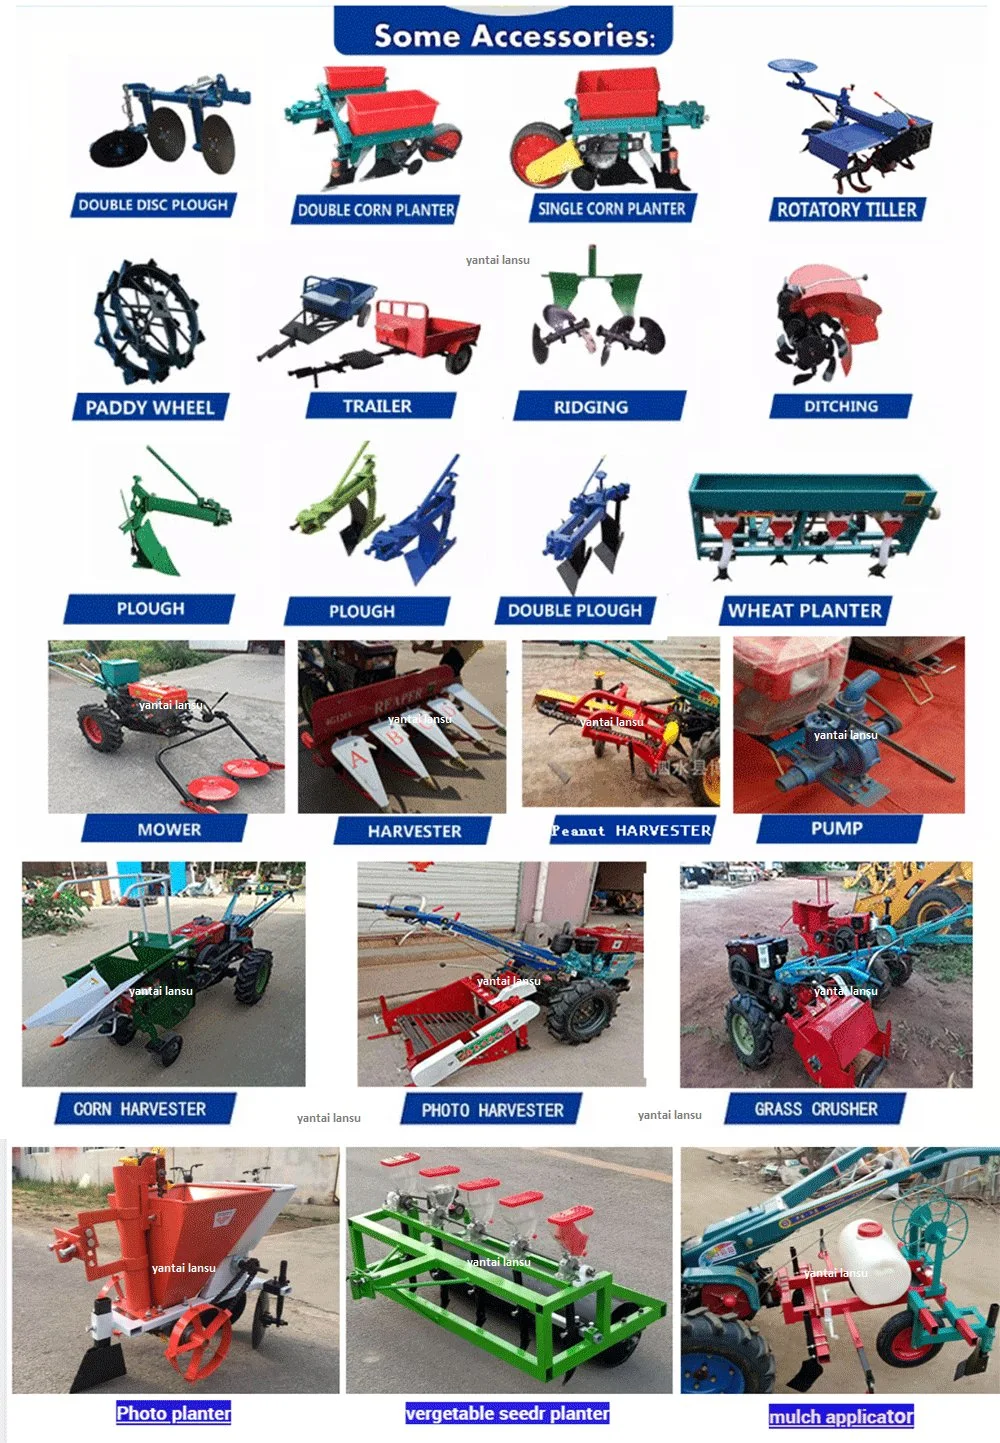 Certificated Hot Sale Walking Tractor